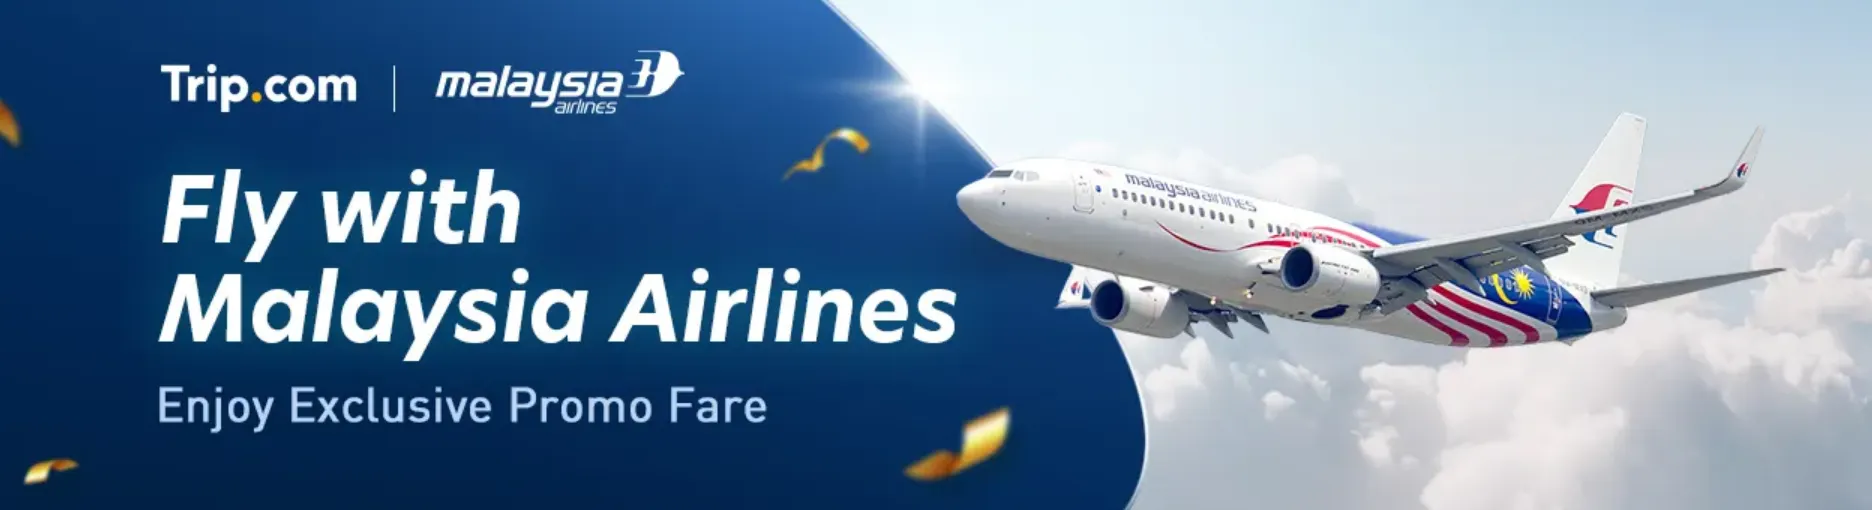 Trip.com Promo Code Malaysia: Fly with Malaysia Airlines